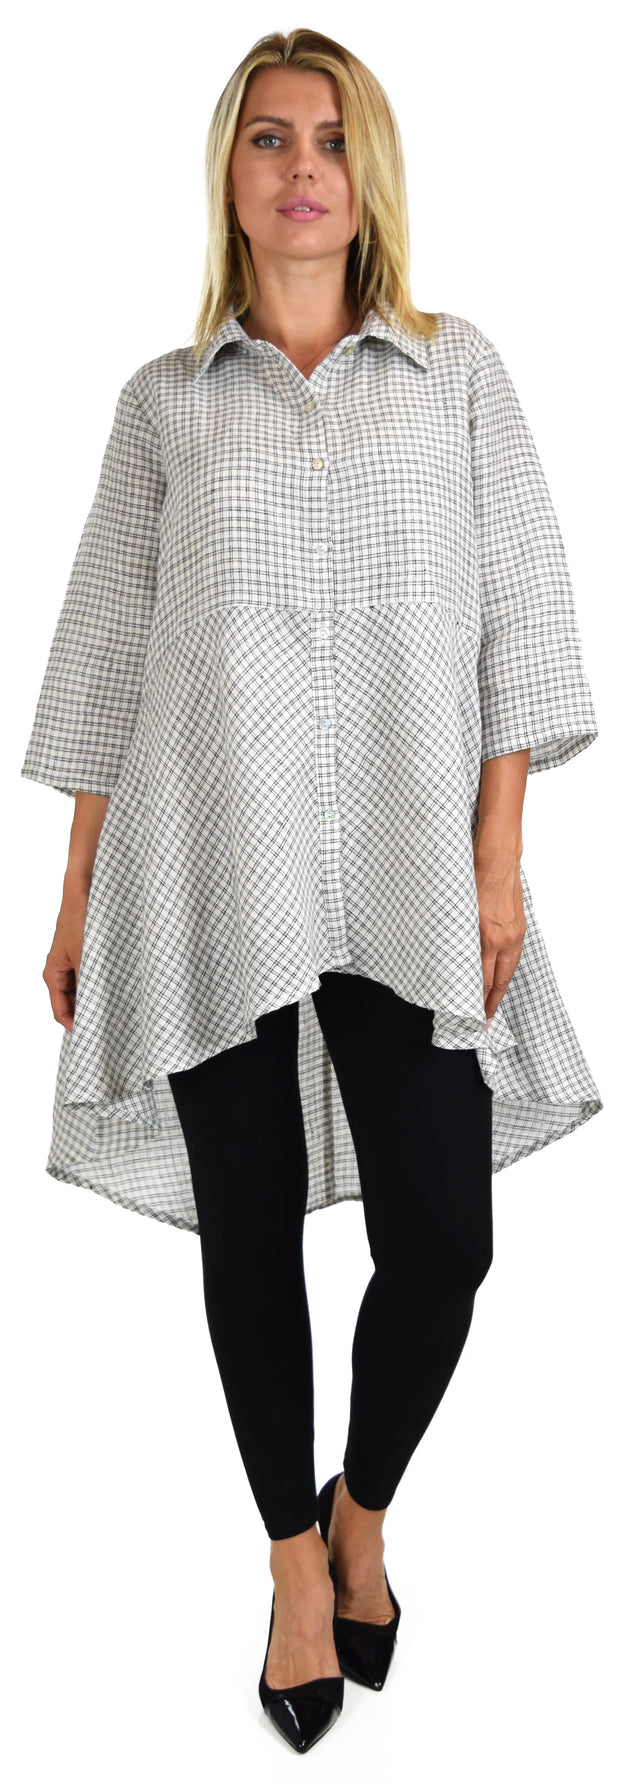 Copy of Hi Low Button Down A Line Swing Dress Shirt Top Reg and Plus Sizes